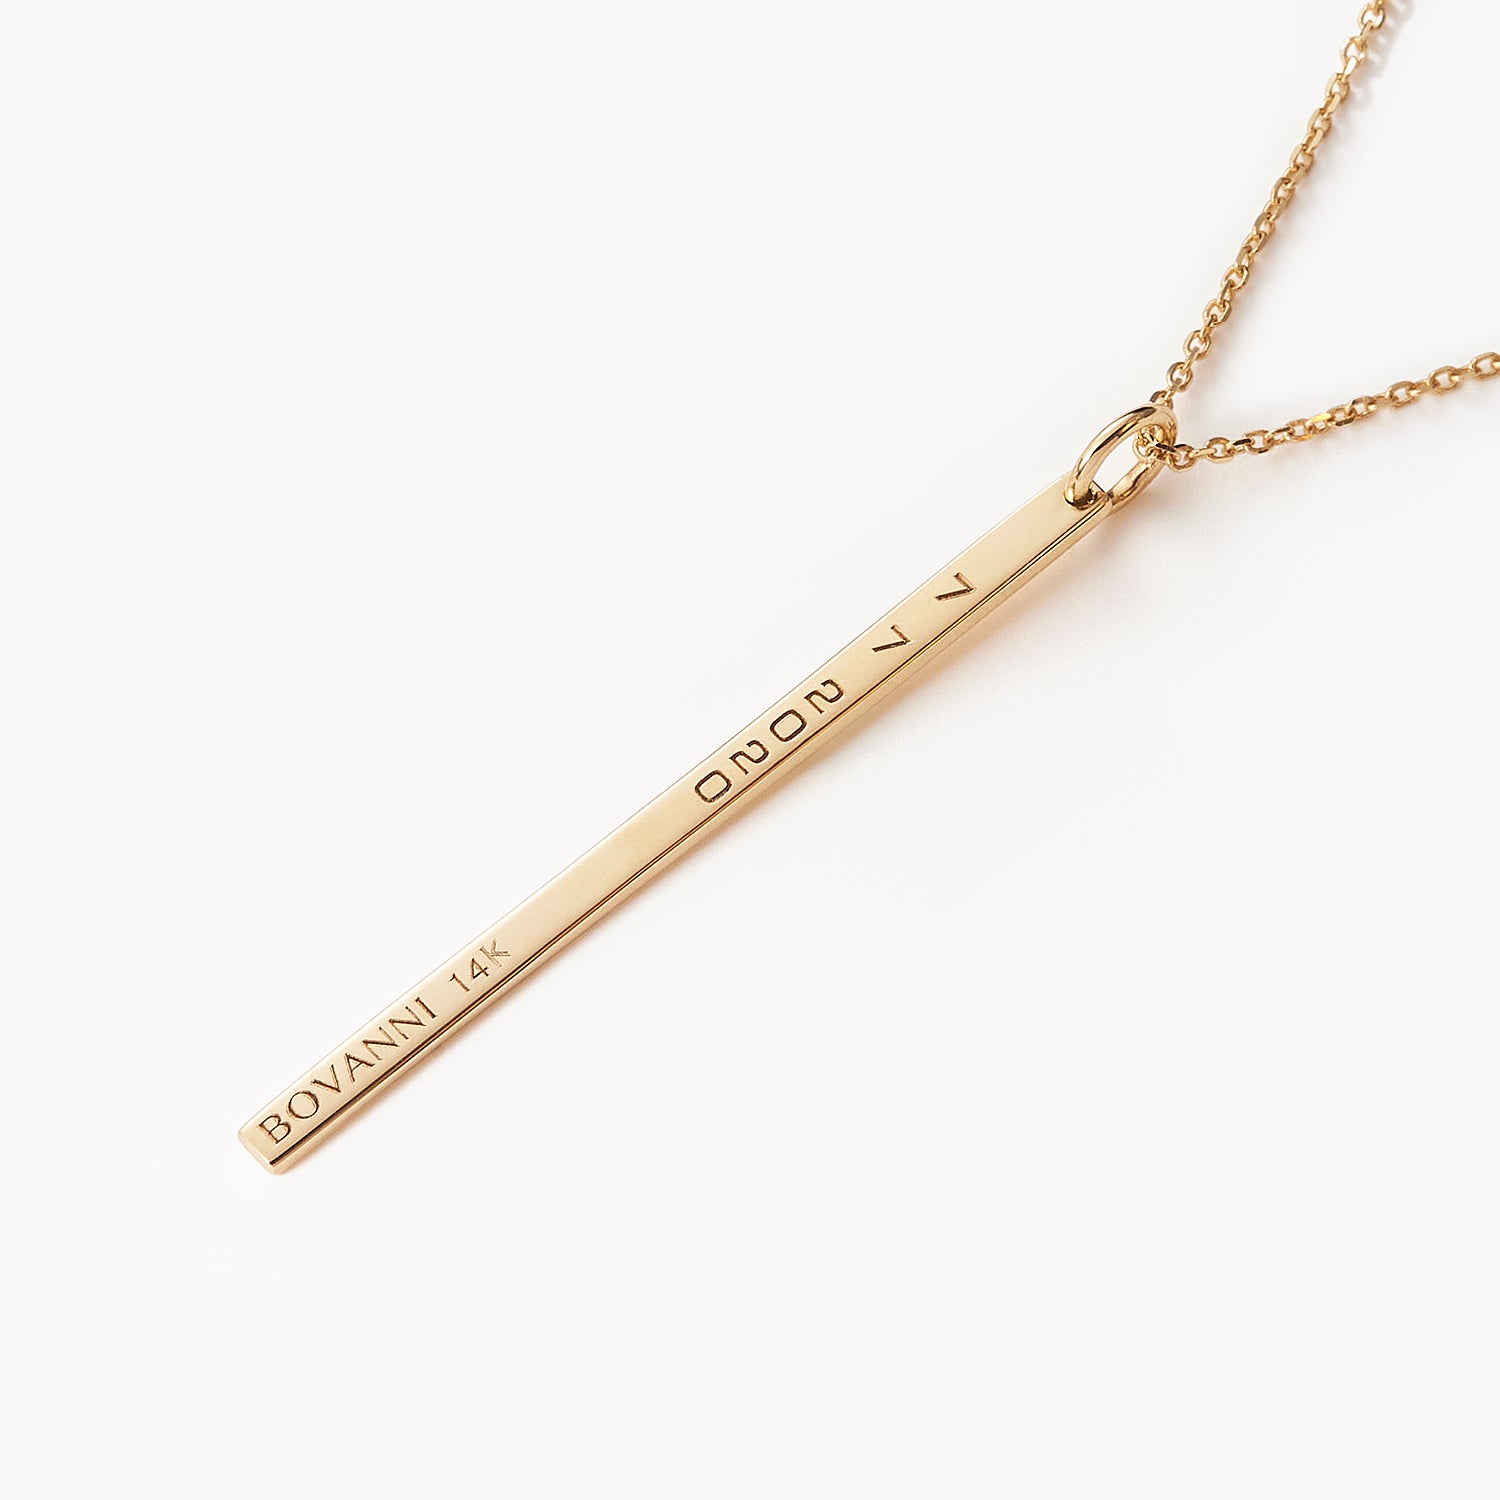 Eternity Bar Personalized Name Necklace in Gold - Talisa